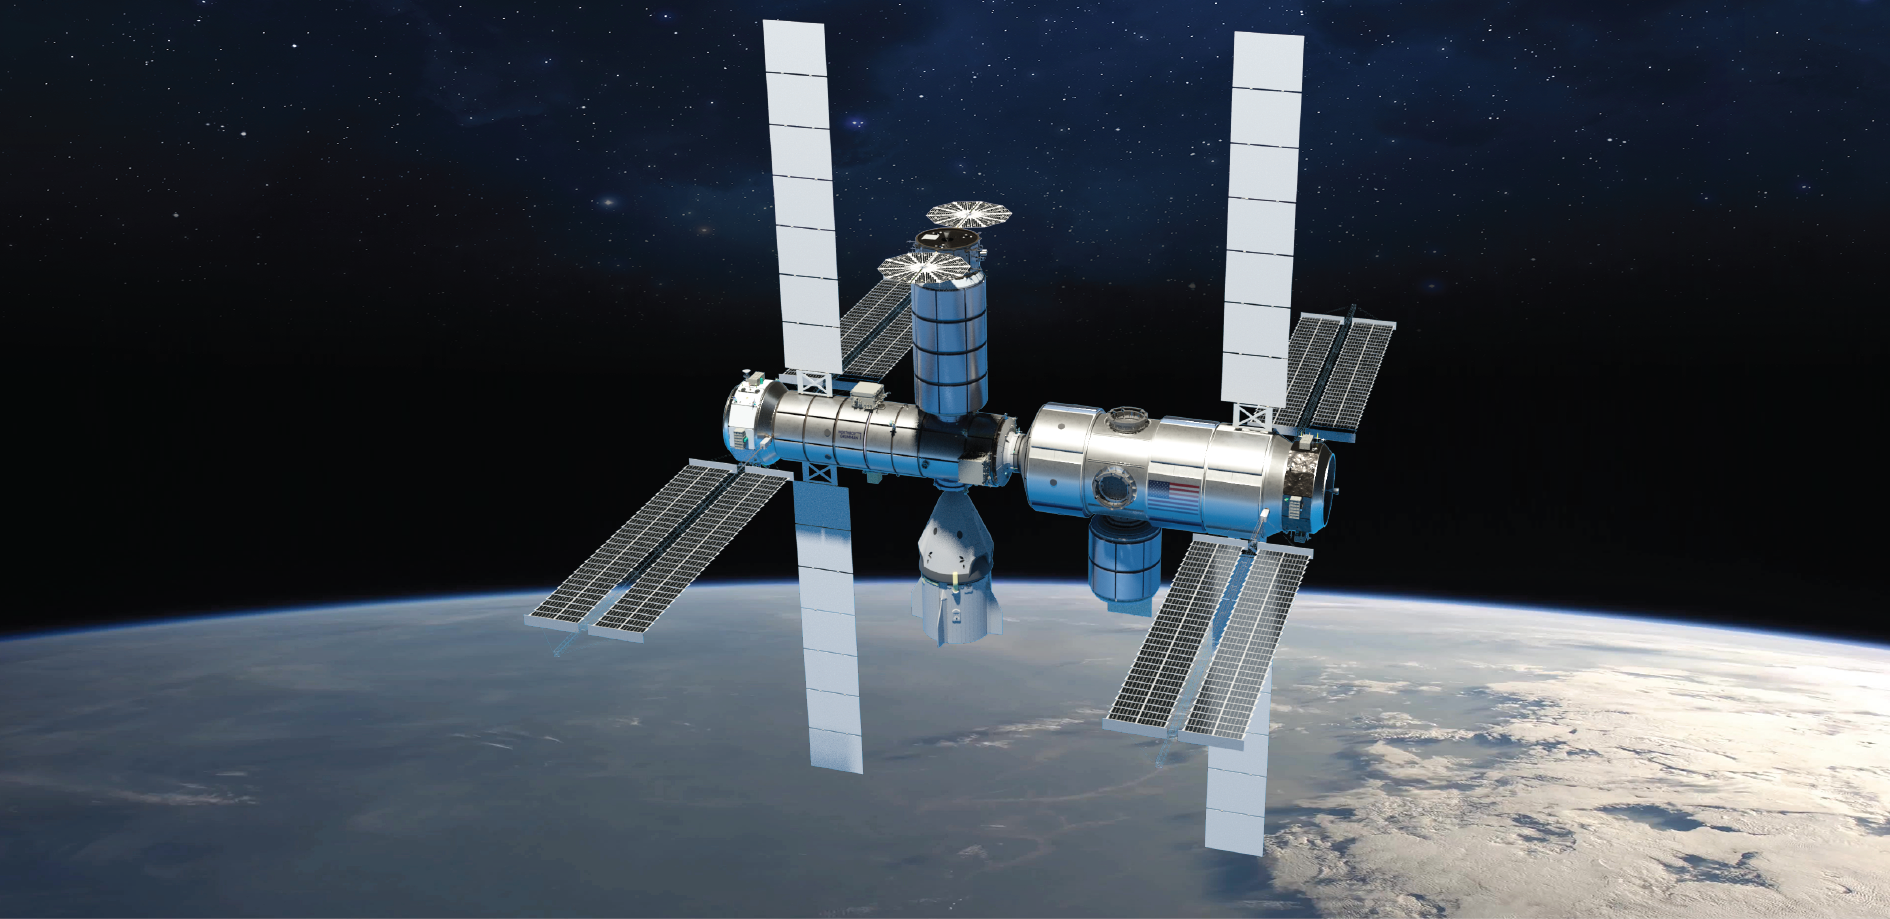 approaching futuristic space station